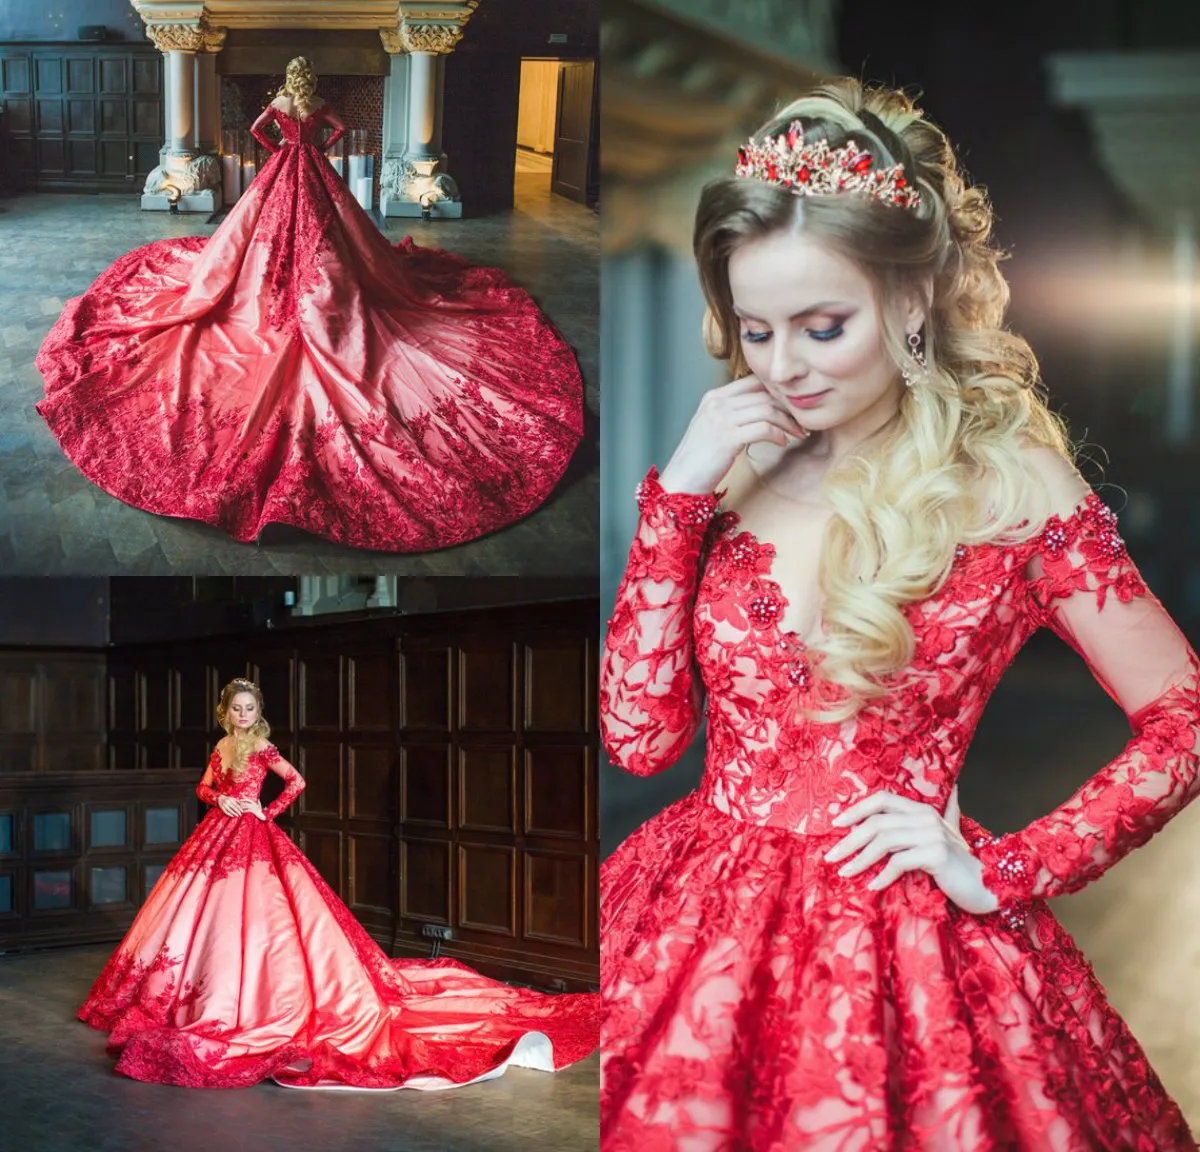 Princess Red Wedding Dresses Nude Jewel Neck Lace Appliques Beaded Crystal Court Train Long Sleeve Bridal Gowns Satin Luxury Wedding Dress